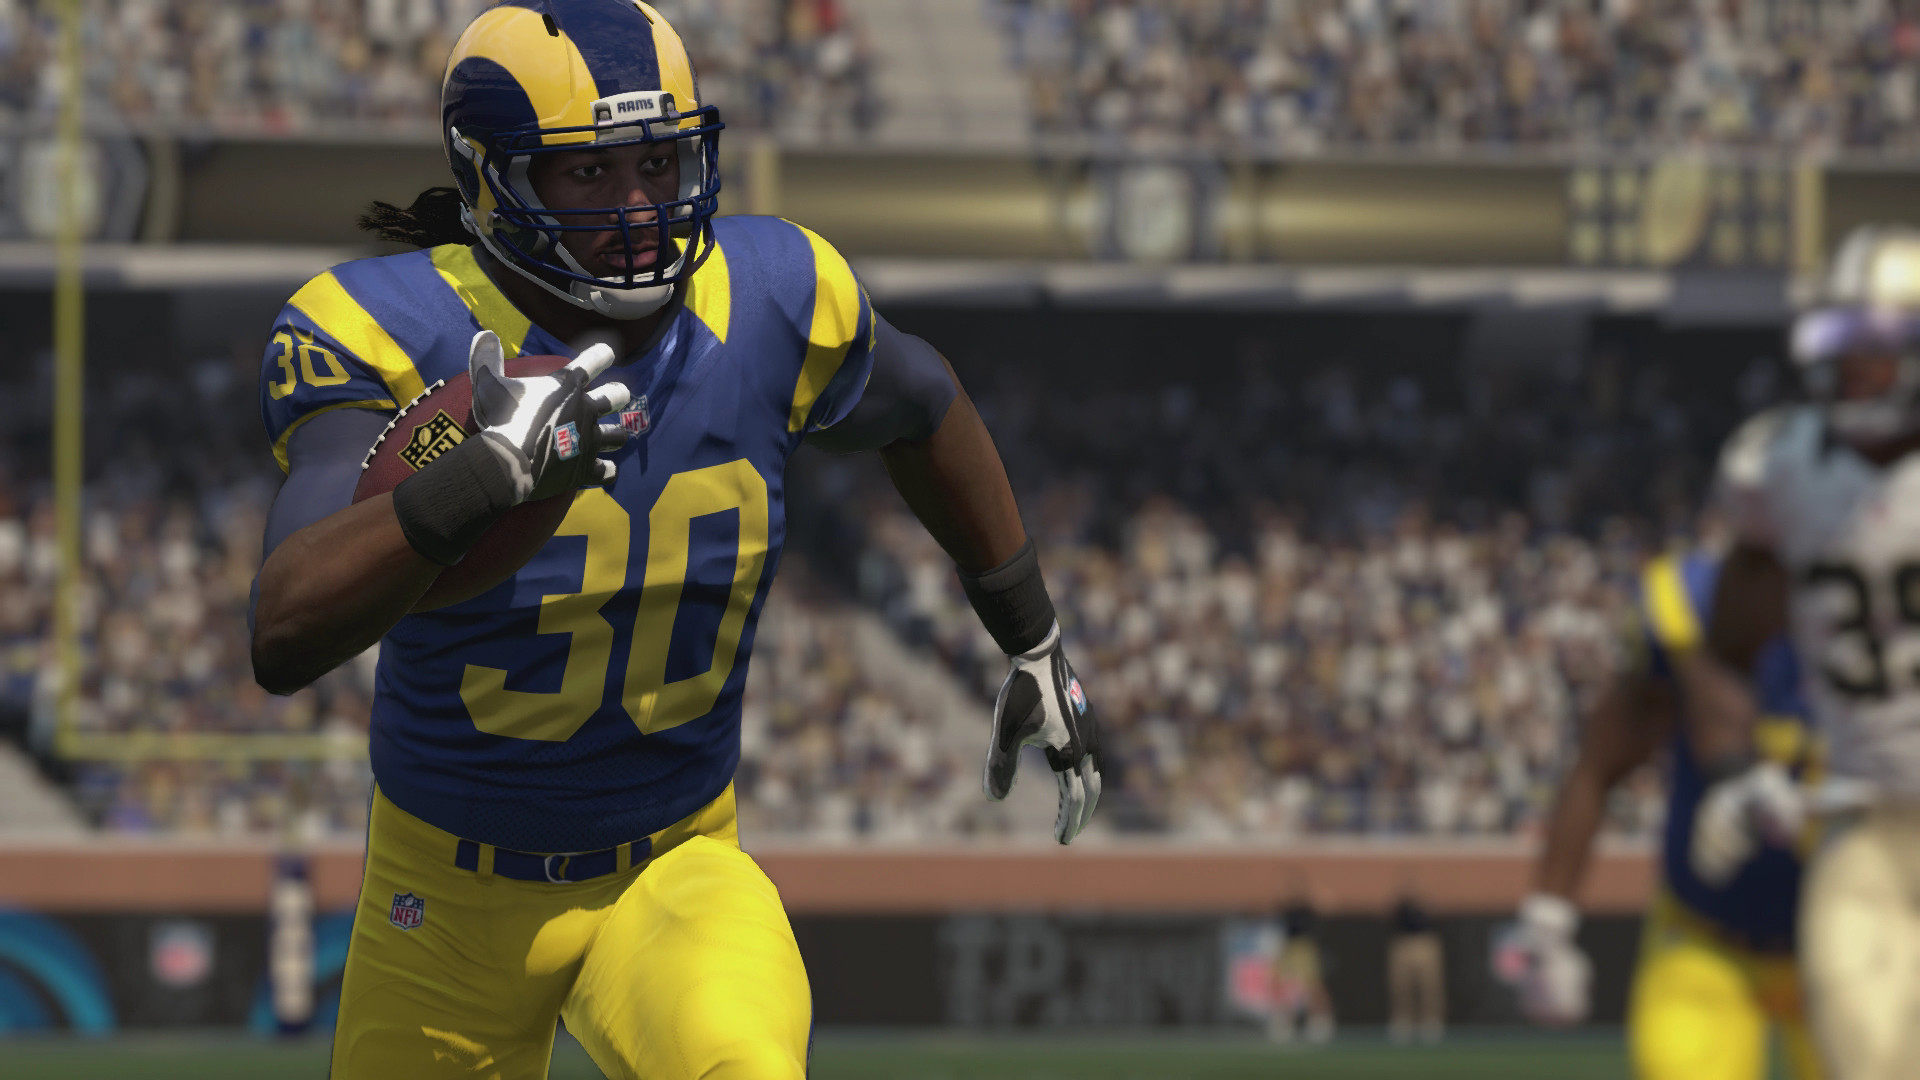 1920x1080 How to move the Rams to Los Angeles in Madden NFL 16 | NFL | Sporting News